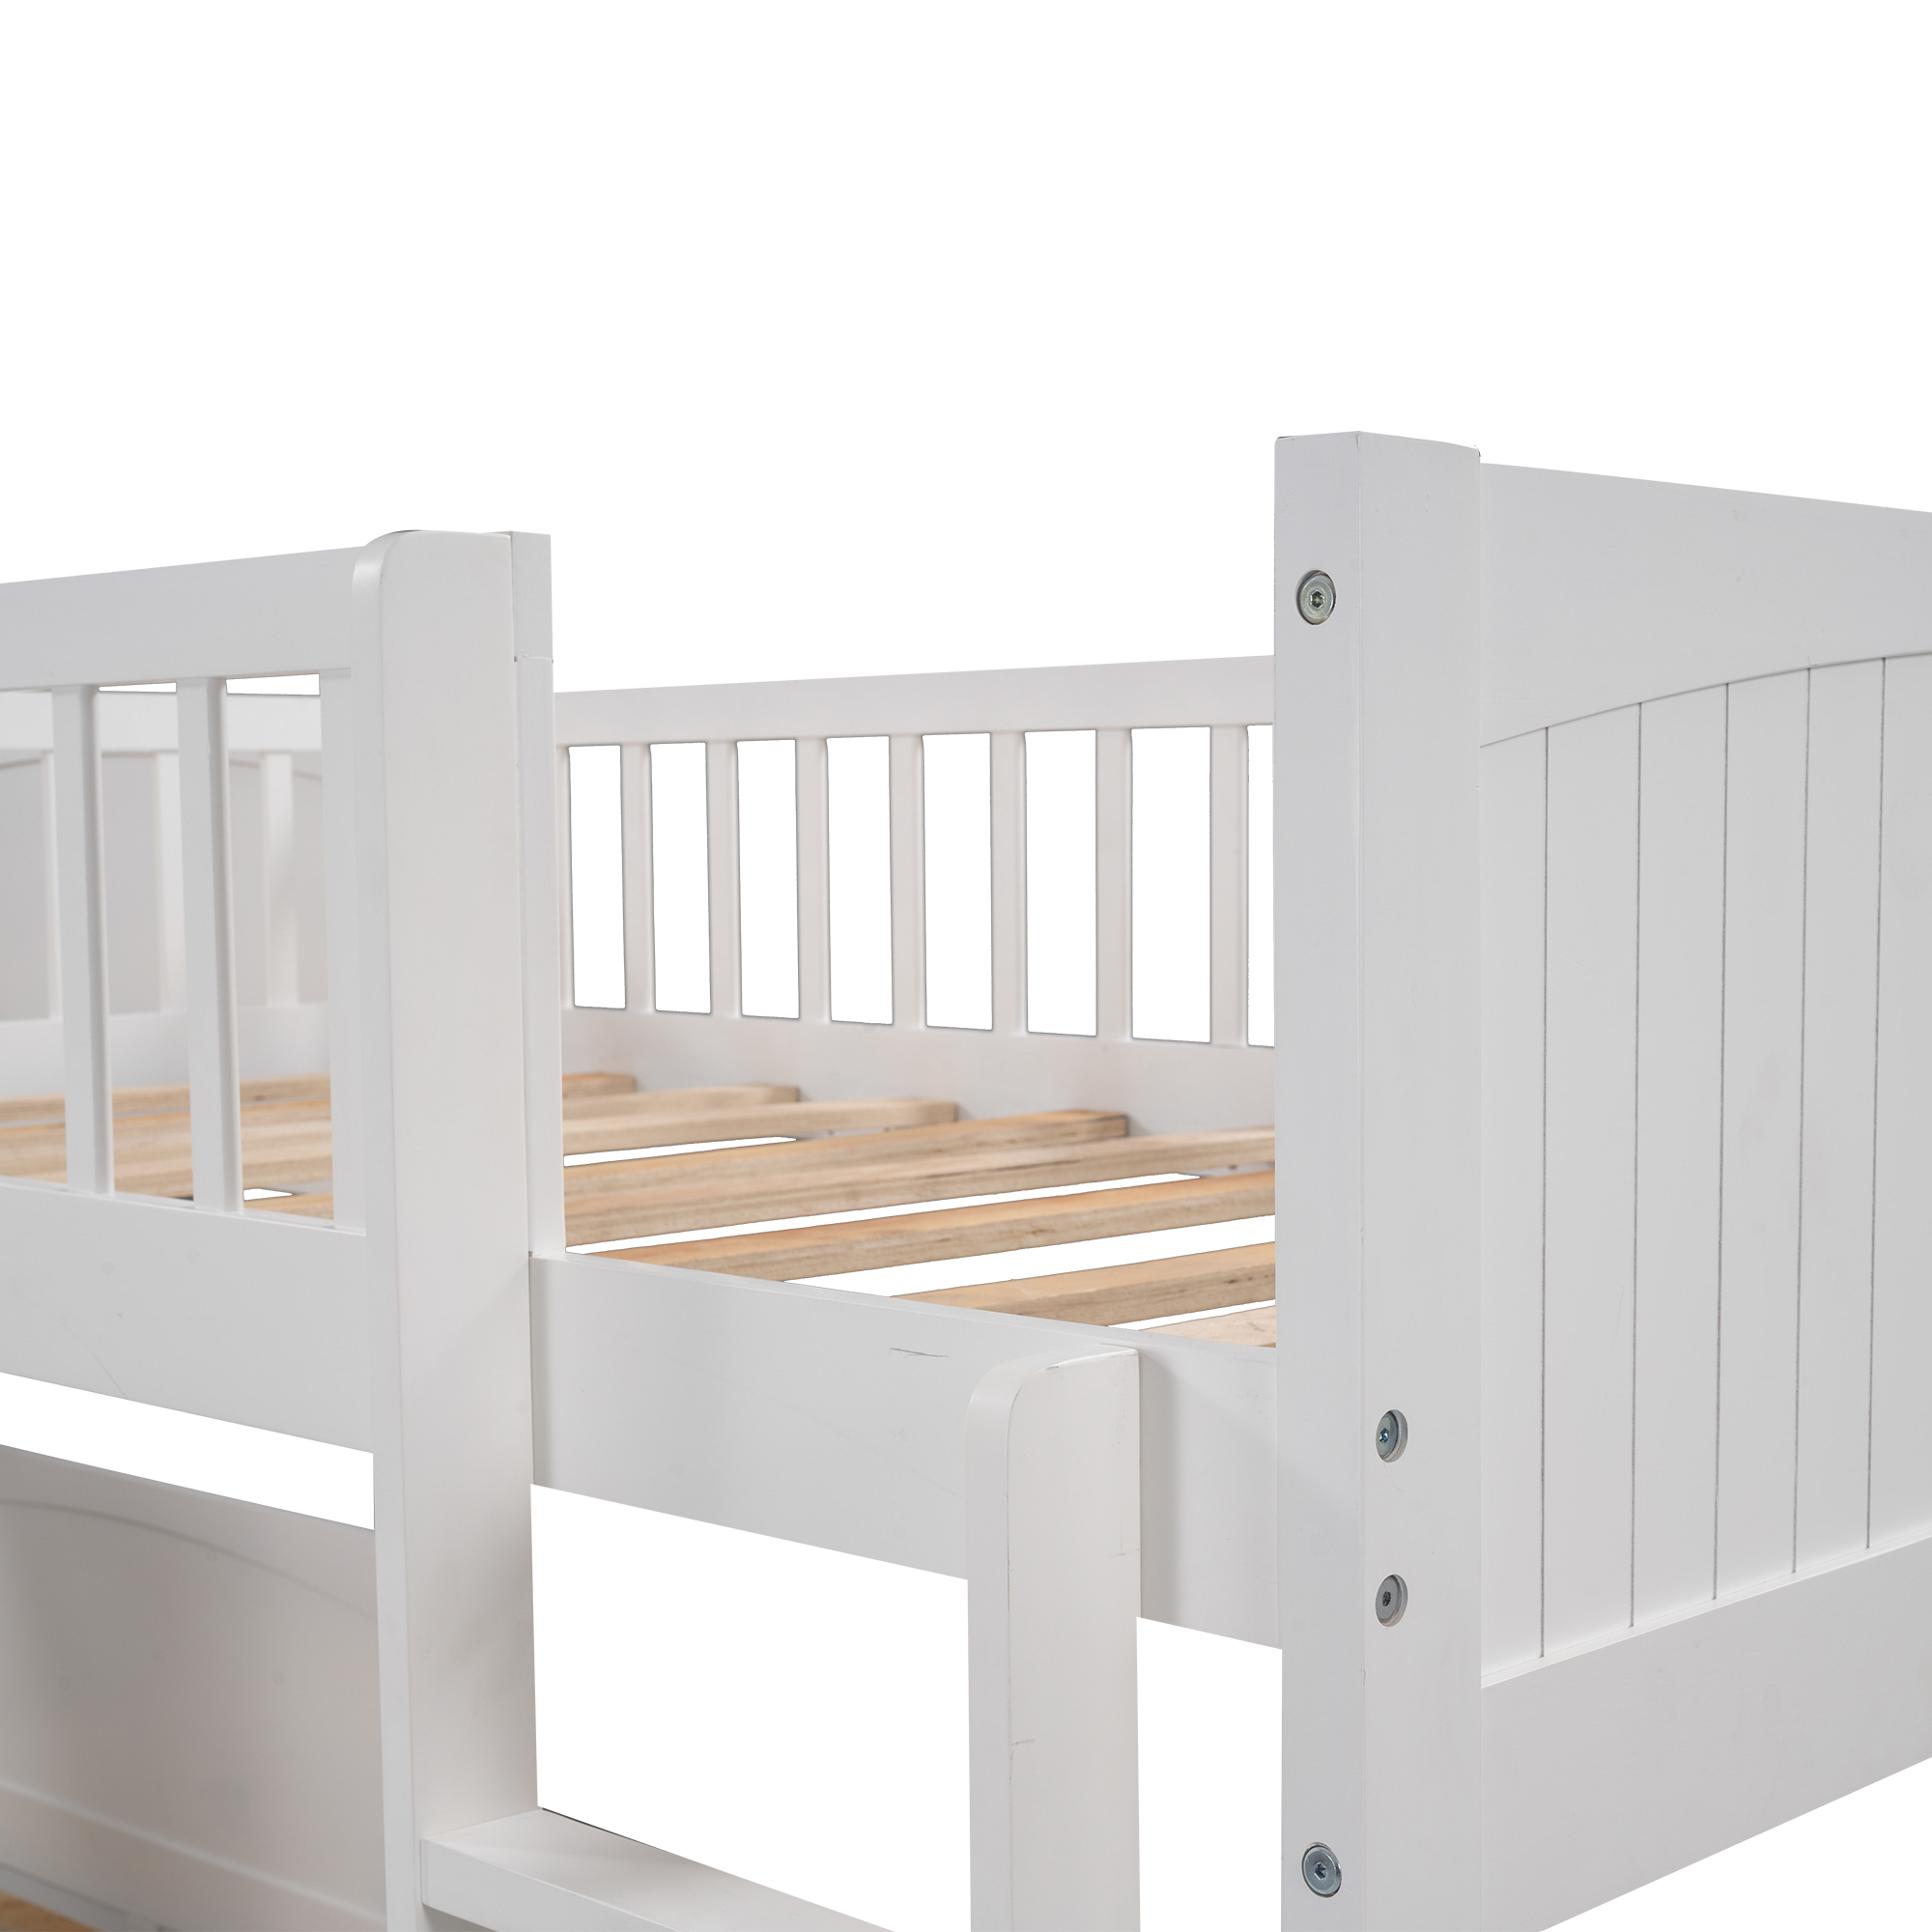 Euroco Wood Bunk Bed Storage, Twin-over-Twin-over-Twin for Children's Bedroom, White - image 8 of 12